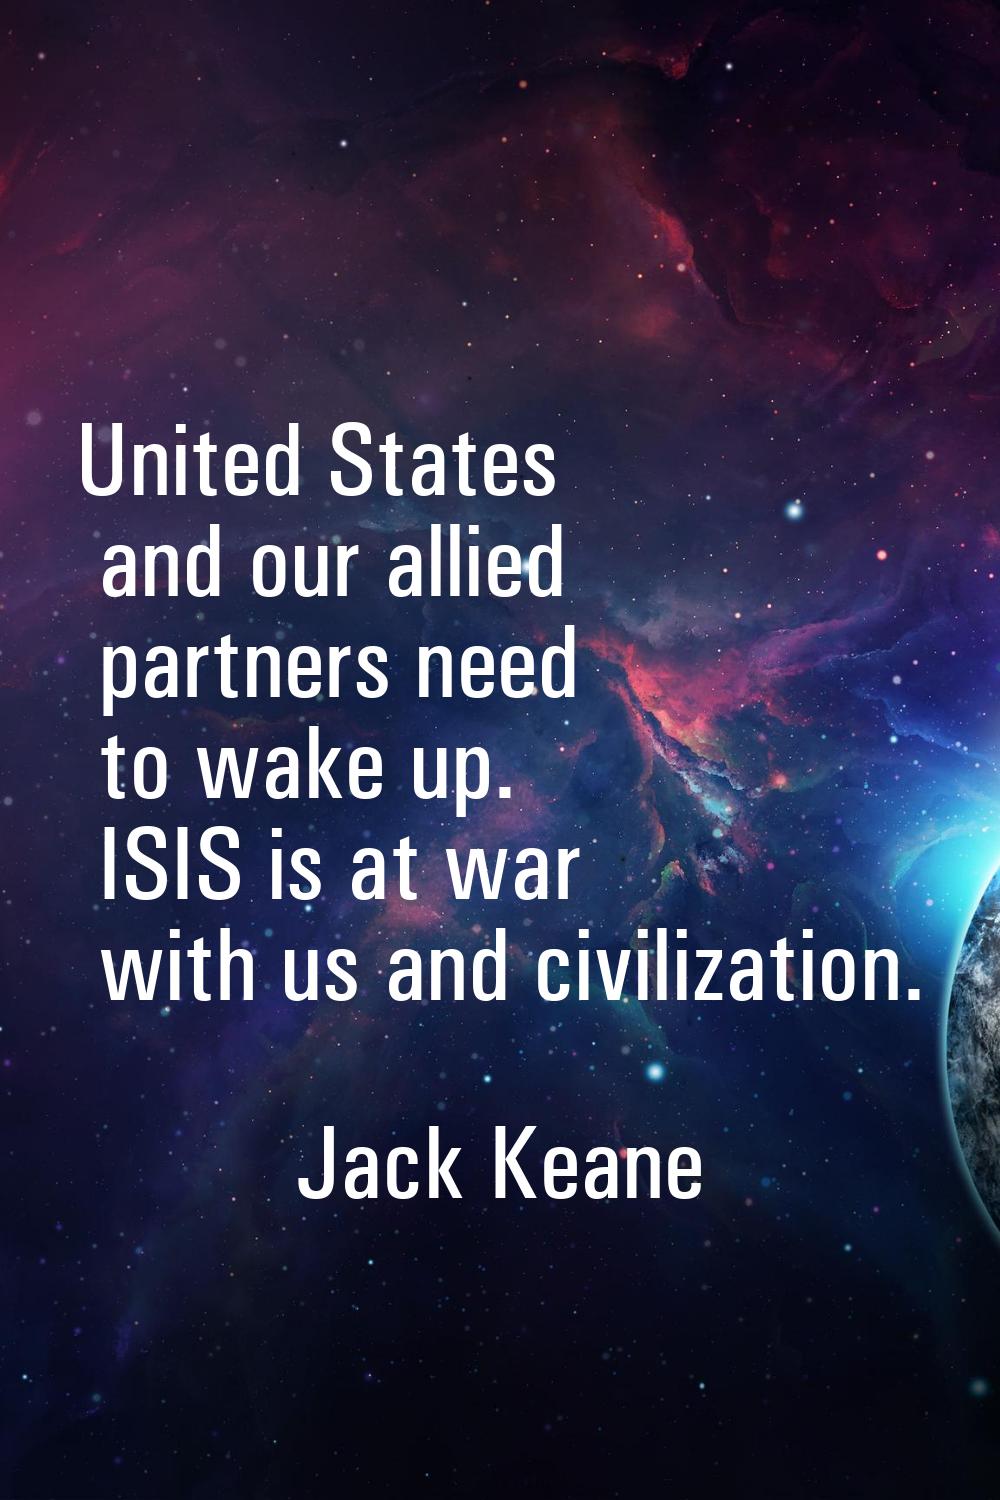 United States and our allied partners need to wake up. ISIS is at war with us and civilization.